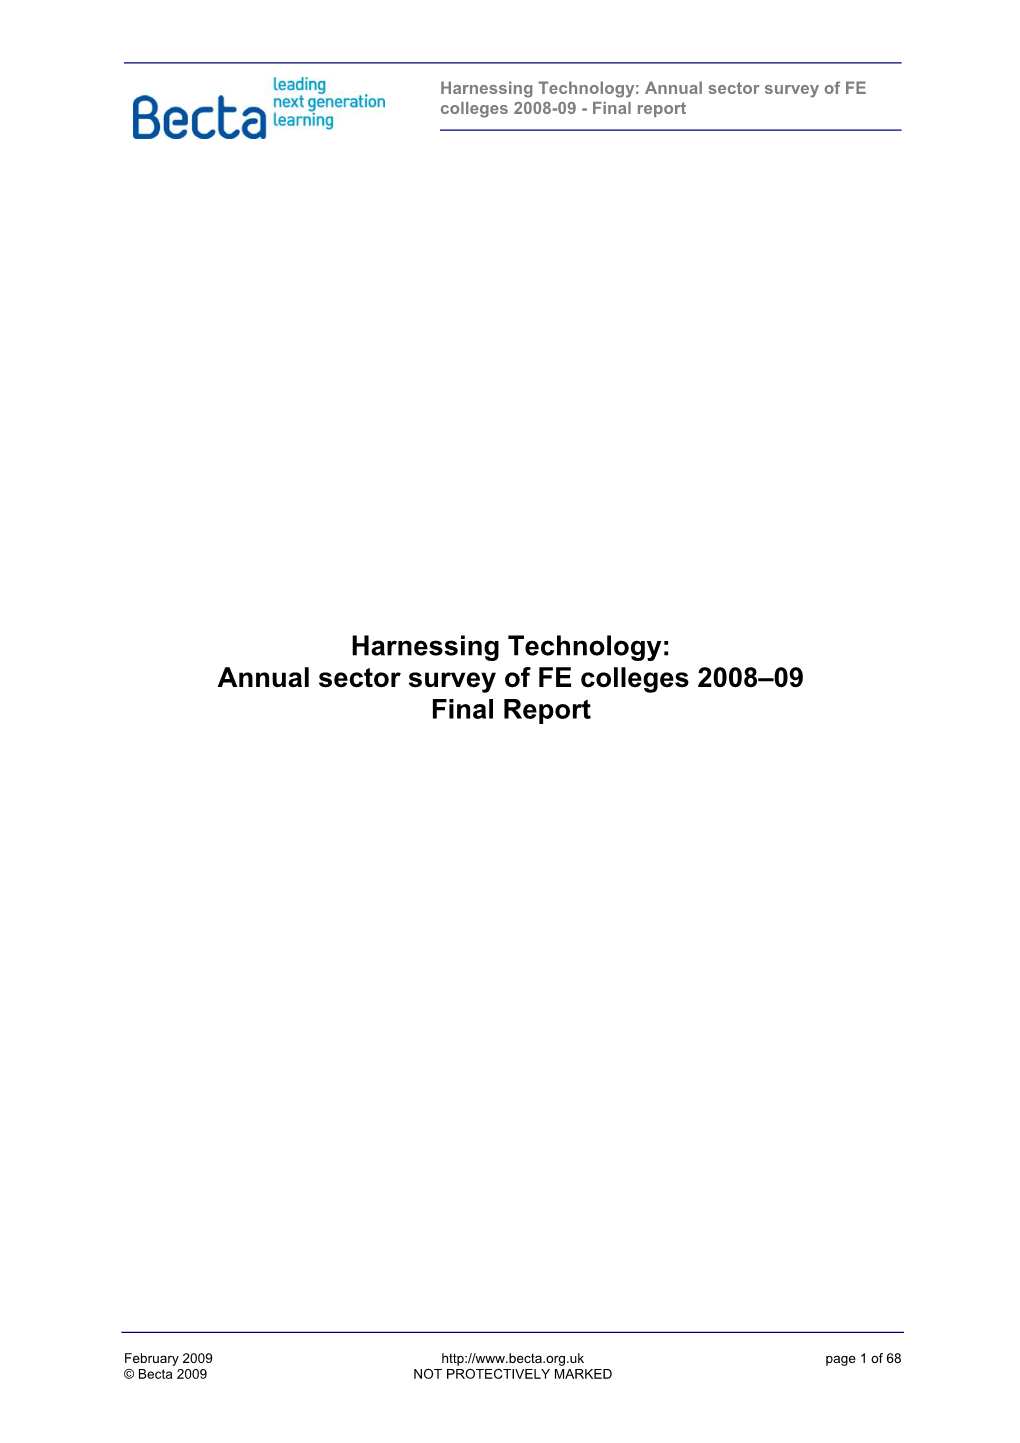 Harnessing Technology: Annual Sector Survey of FE Colleges 2008-09 - Final Report